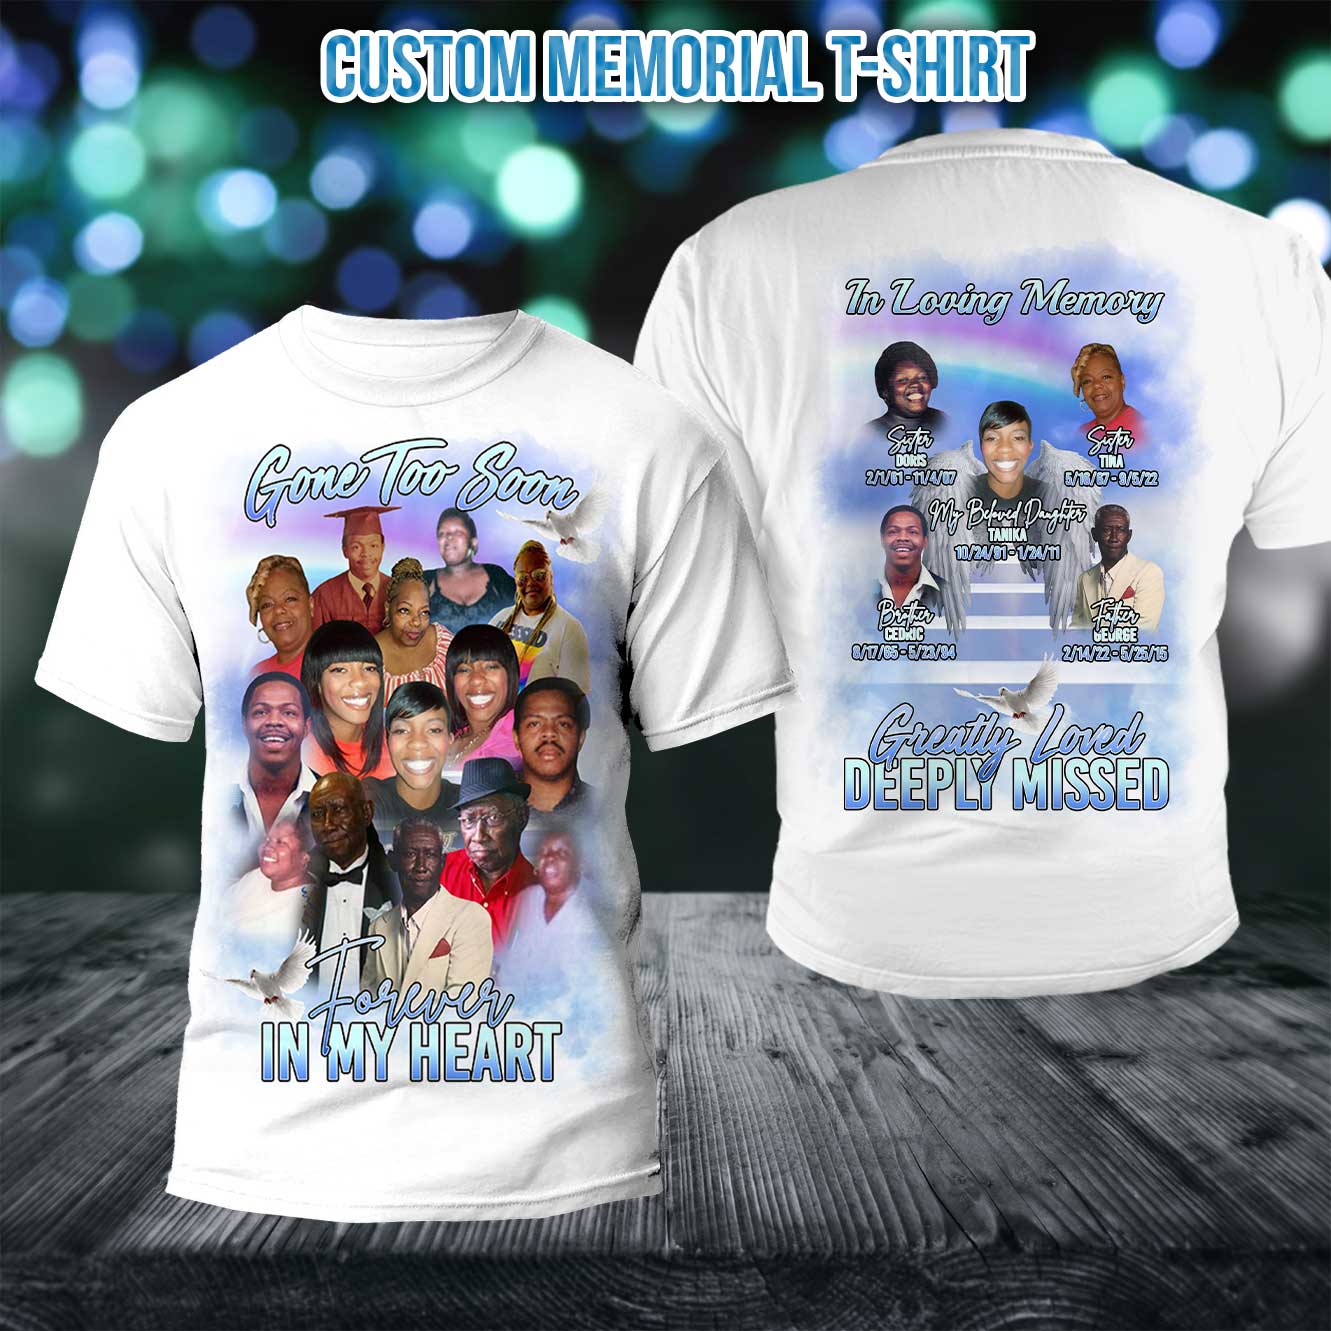 Your Wings Were Ready Family Memorial Custom Photo Shirt